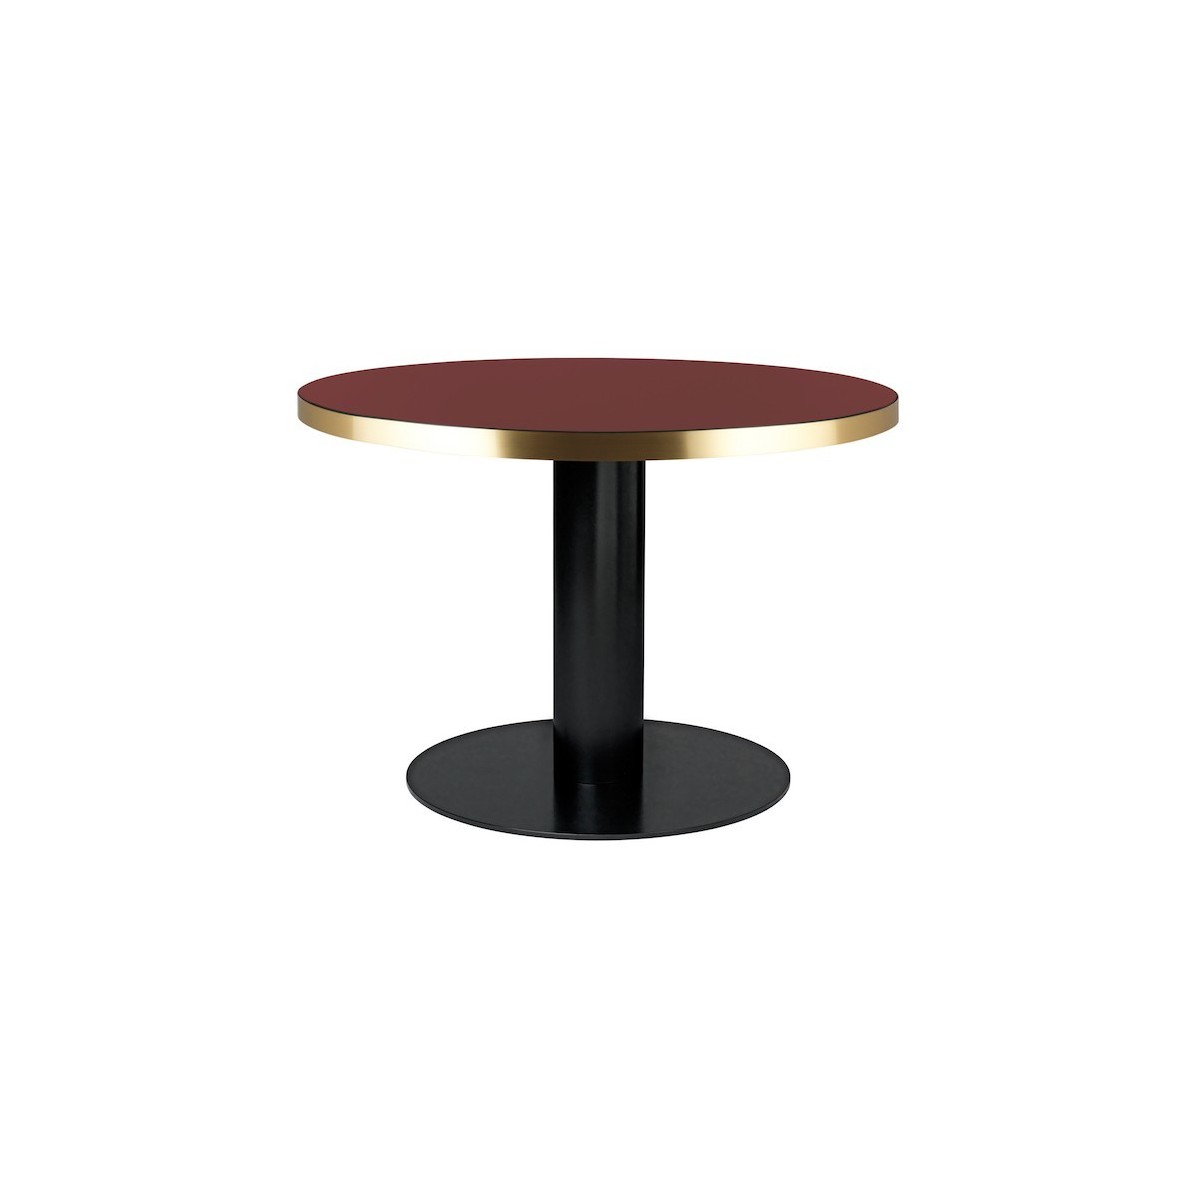 Cherry red + black base - Gubi 2.0 round table - glass table top